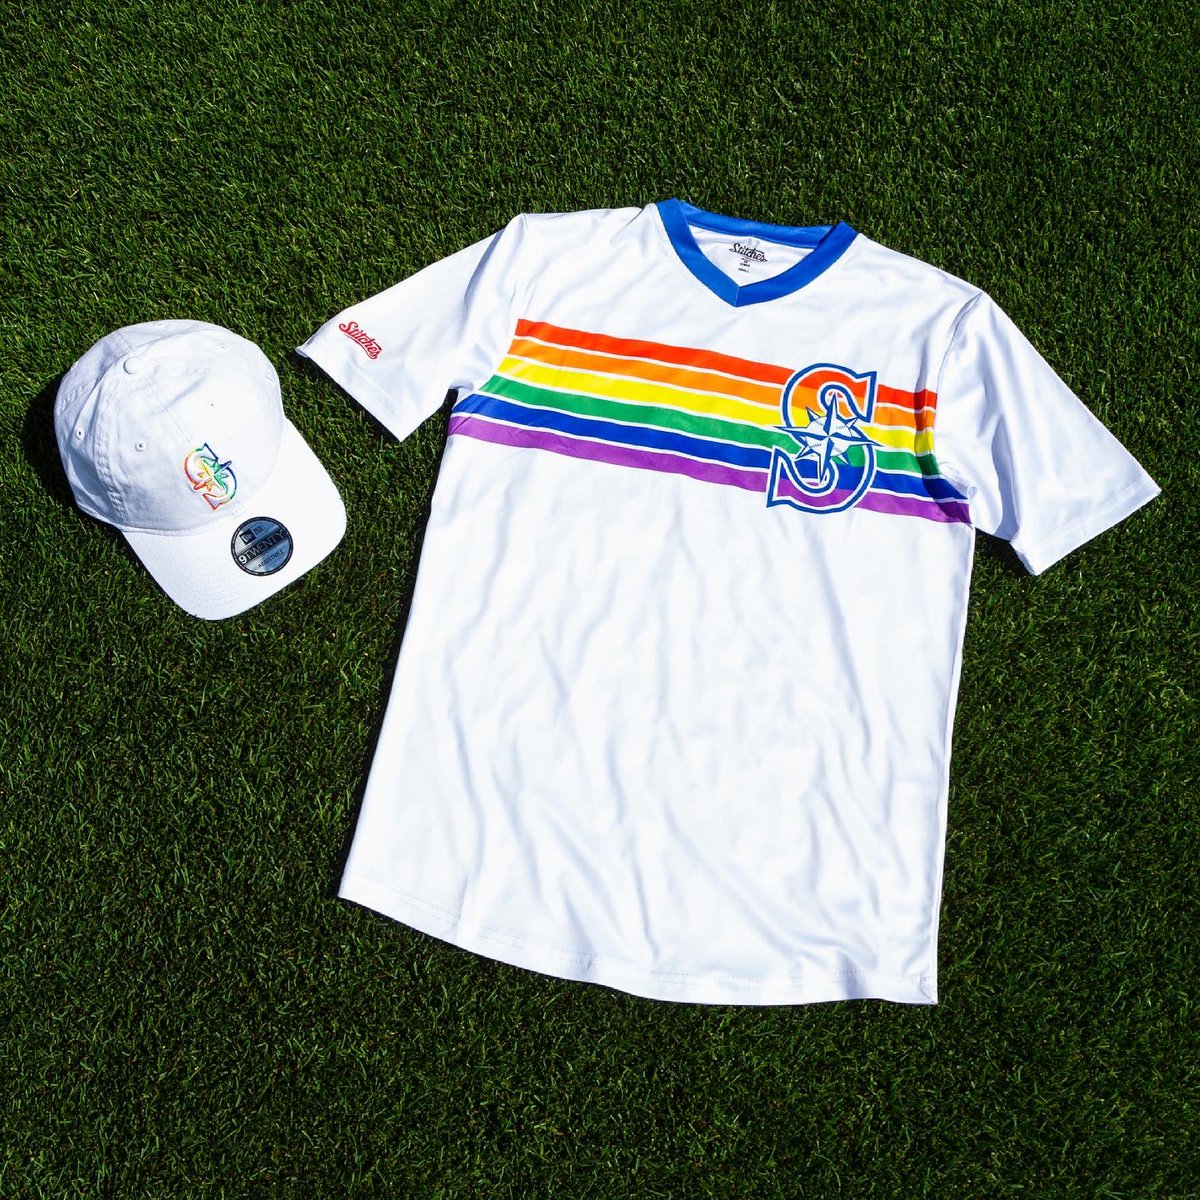 Mariners Team Store on X: Check out our @Mariners #PRIDE gear